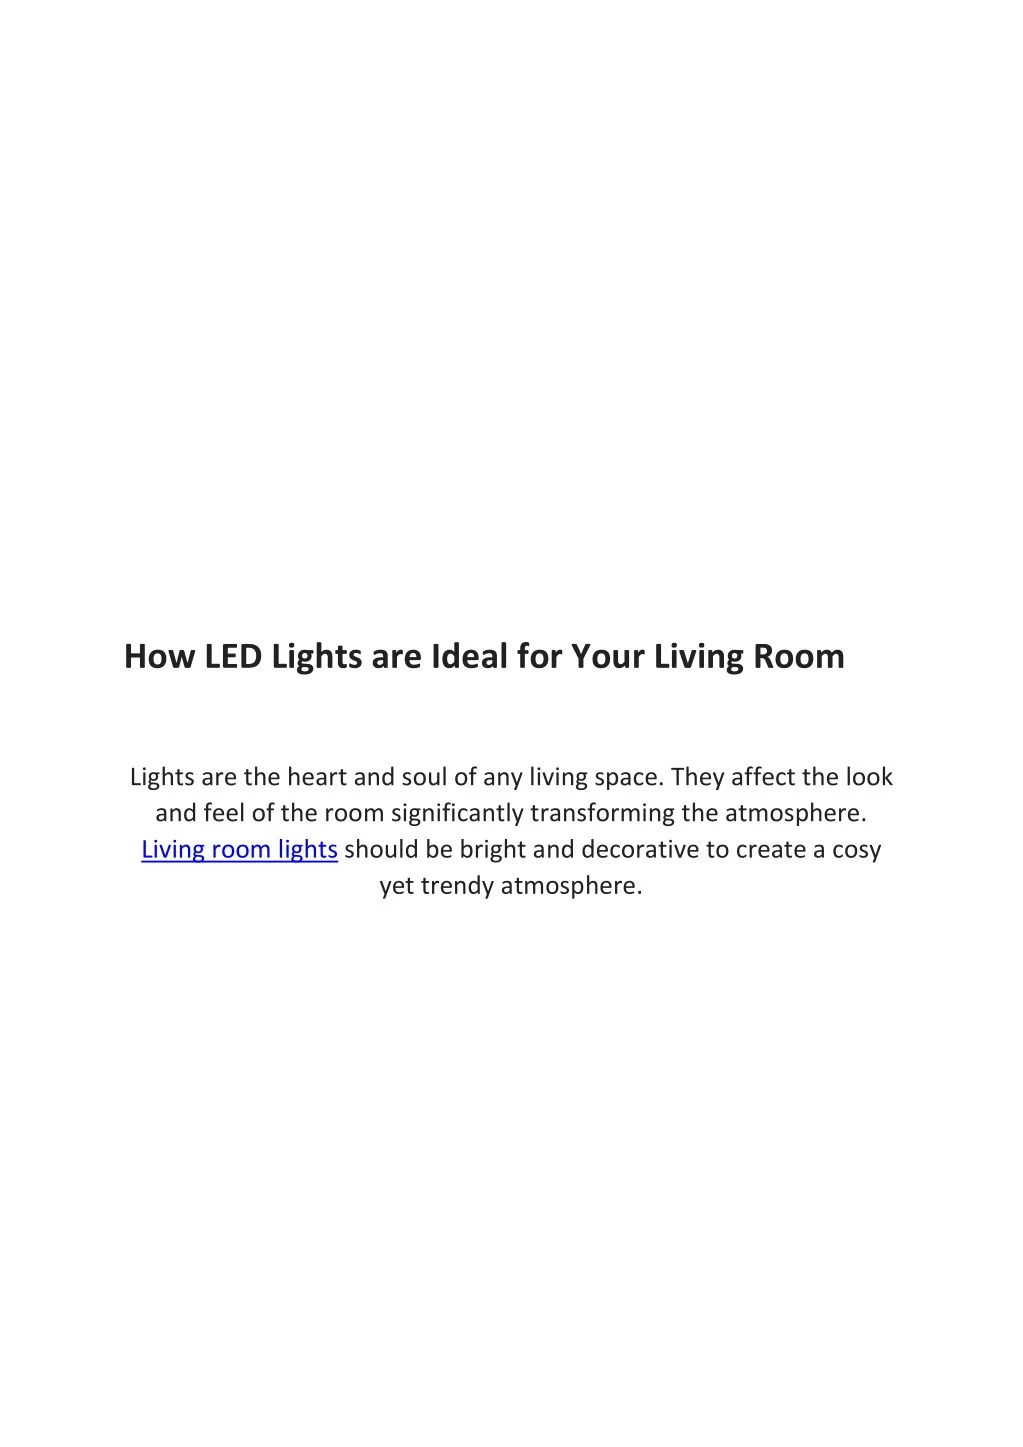 how led lights are ideal for your living room